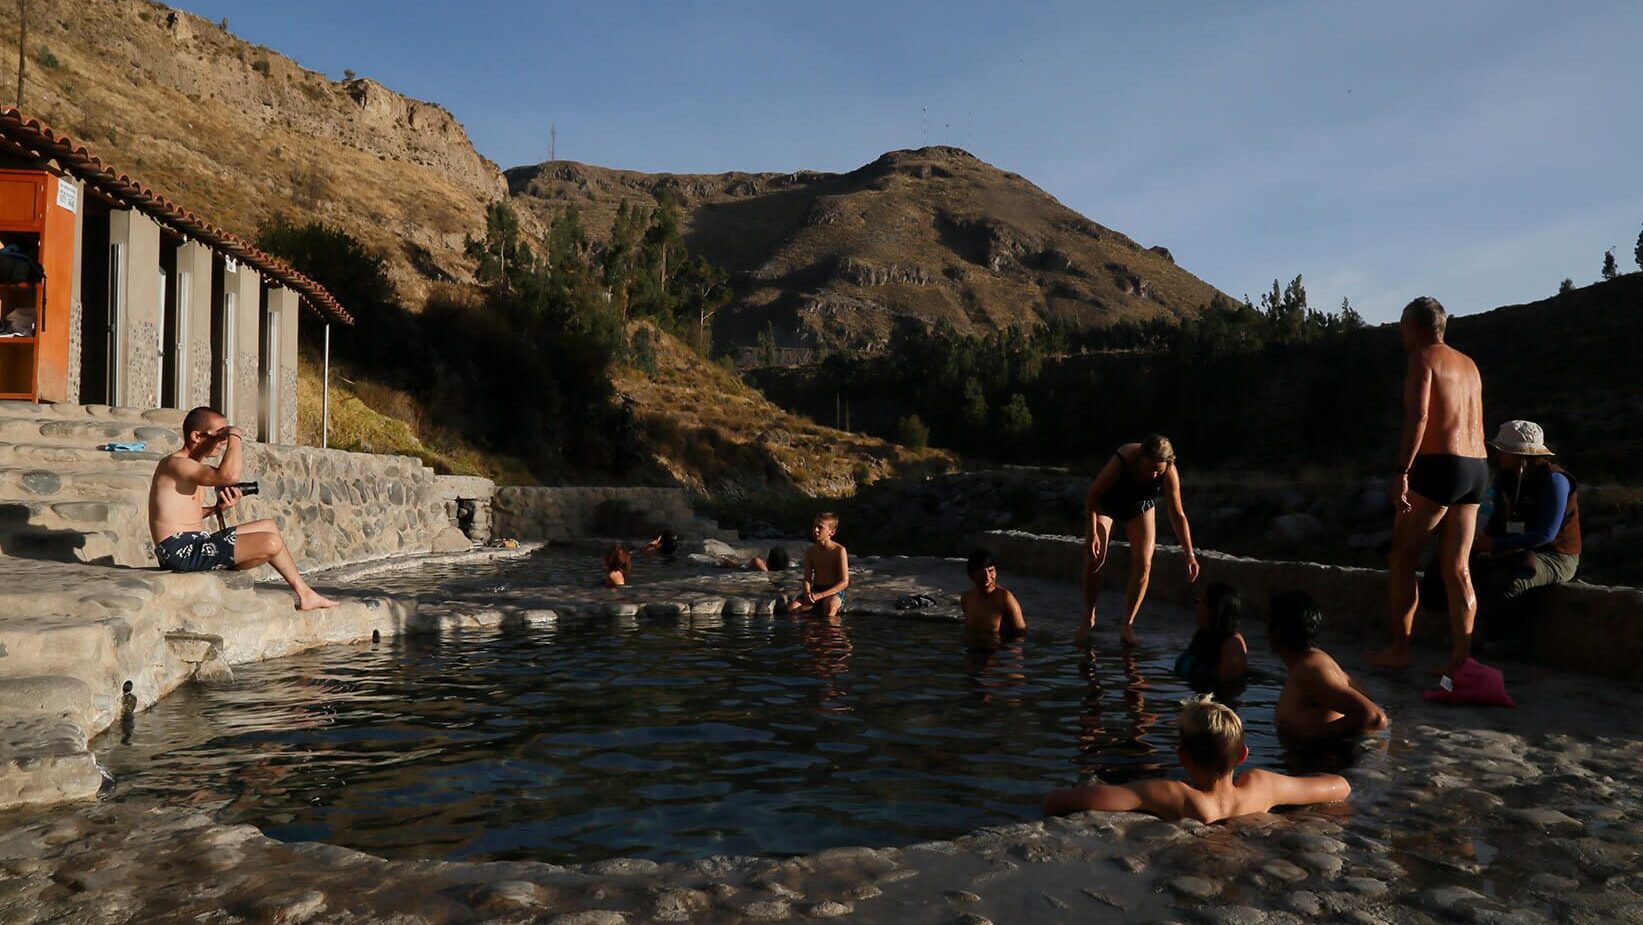 The thermal baths of Coporaque are off the beaten path. Visit them with RESPONSible Travel Peru.